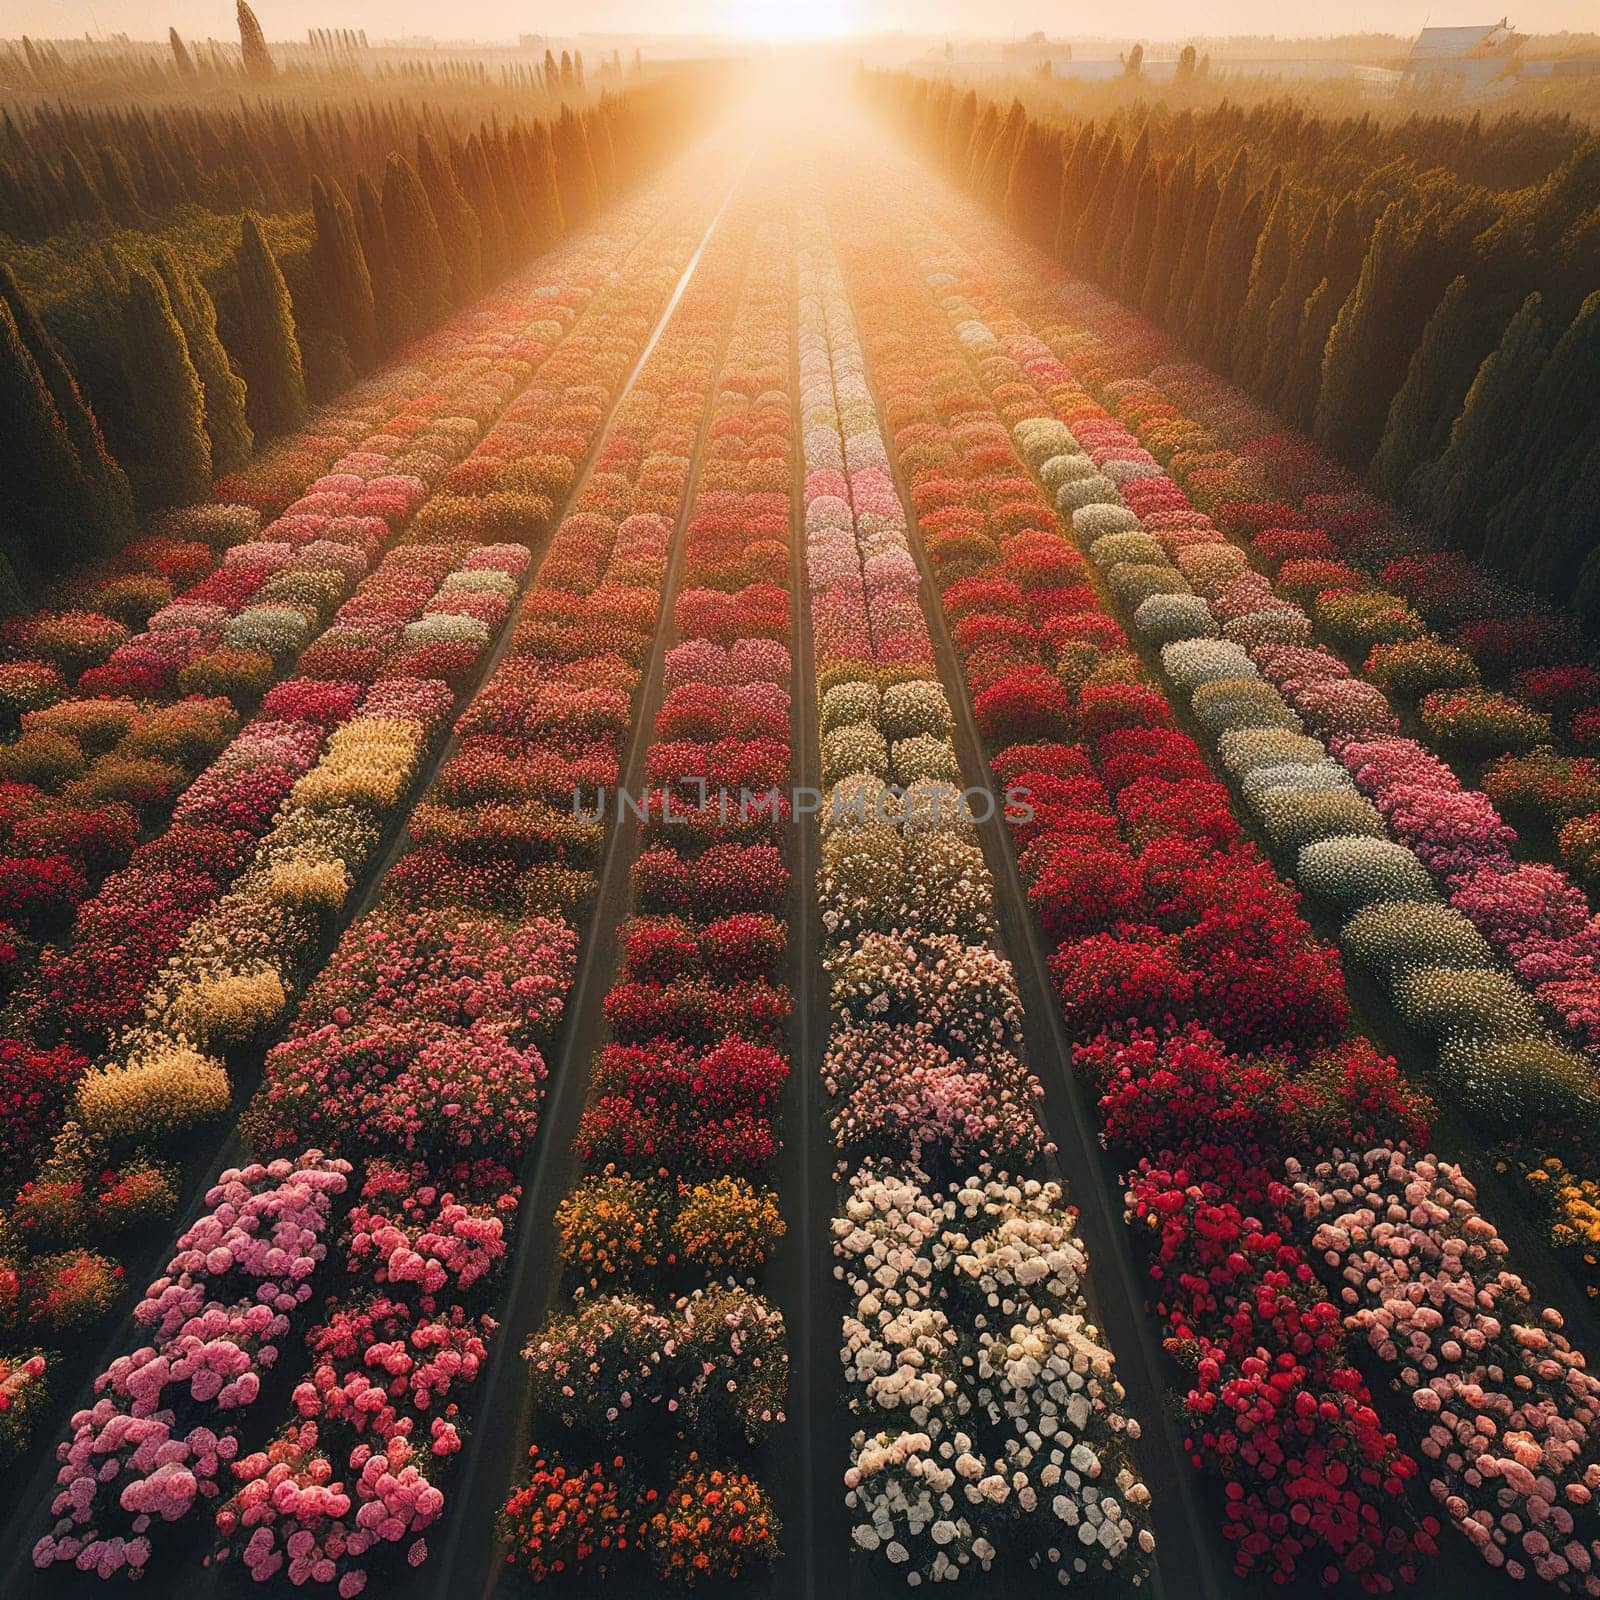 Fields of flowers at sunset. High quality illustration